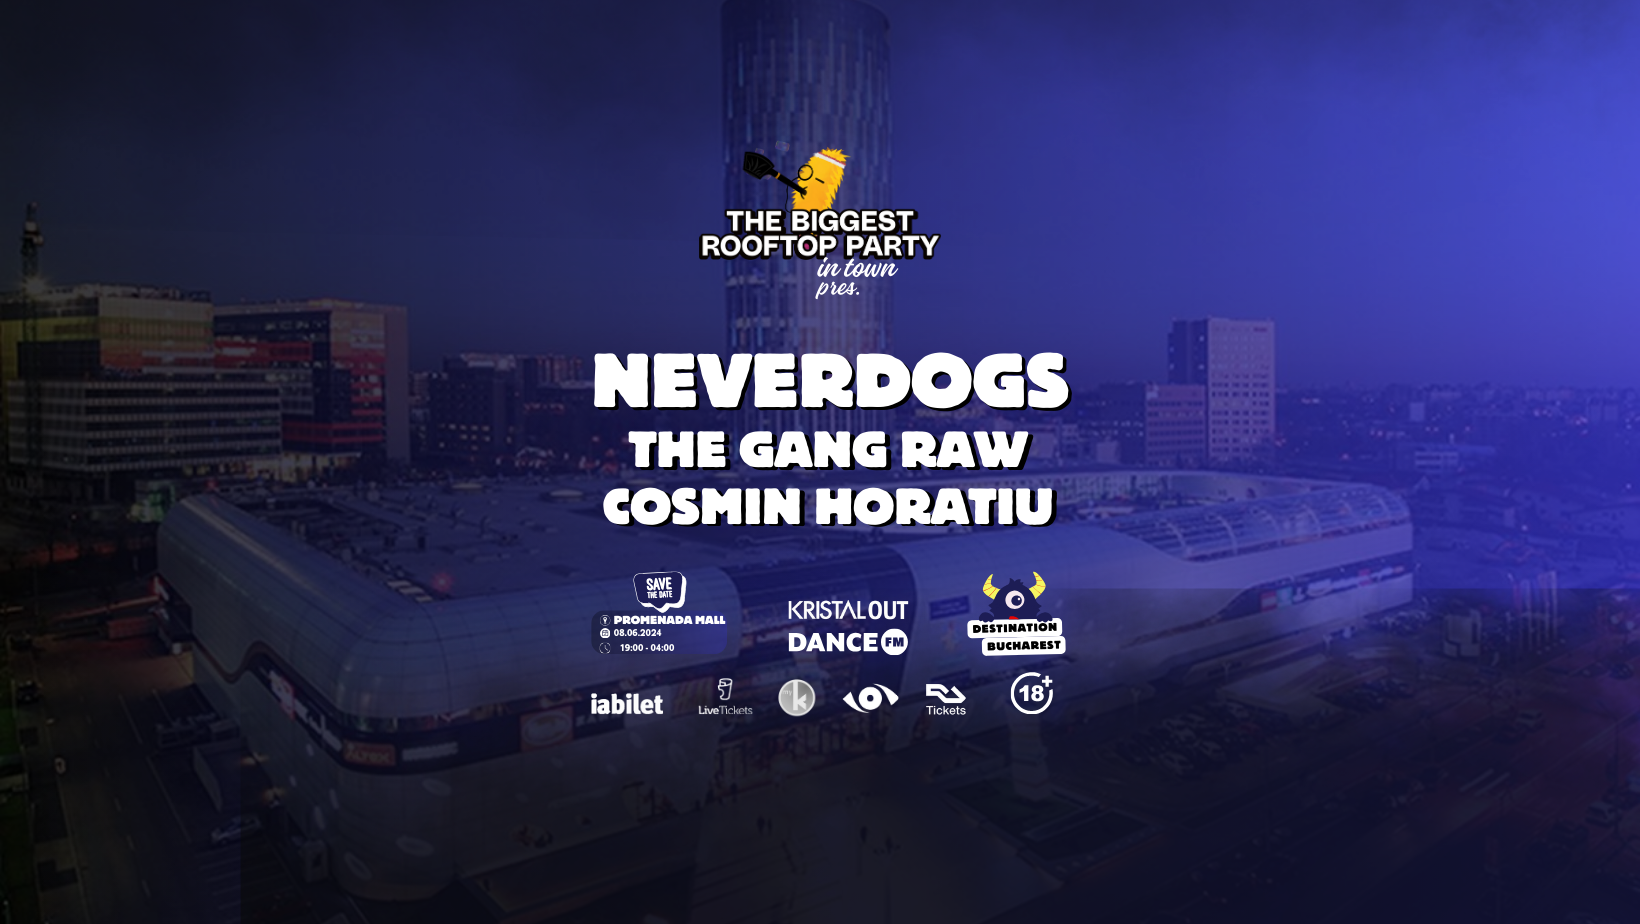 The Biggest Rooftop Party in Town w. Neverdogs - フライヤー裏